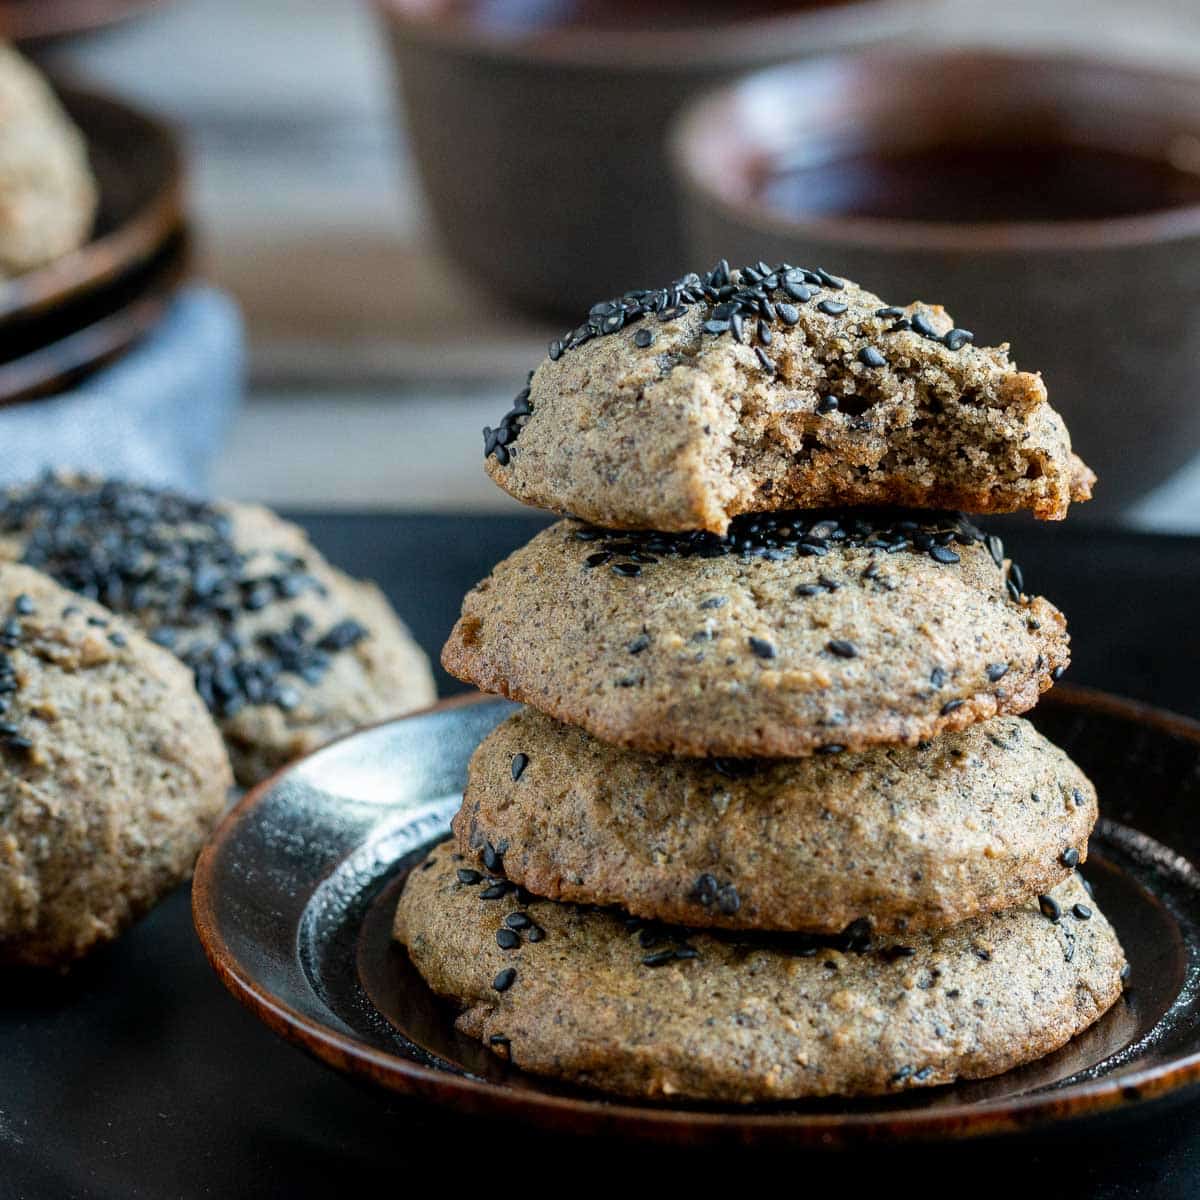 One black sesame cookie with a bite out of it on a stack of cookies.